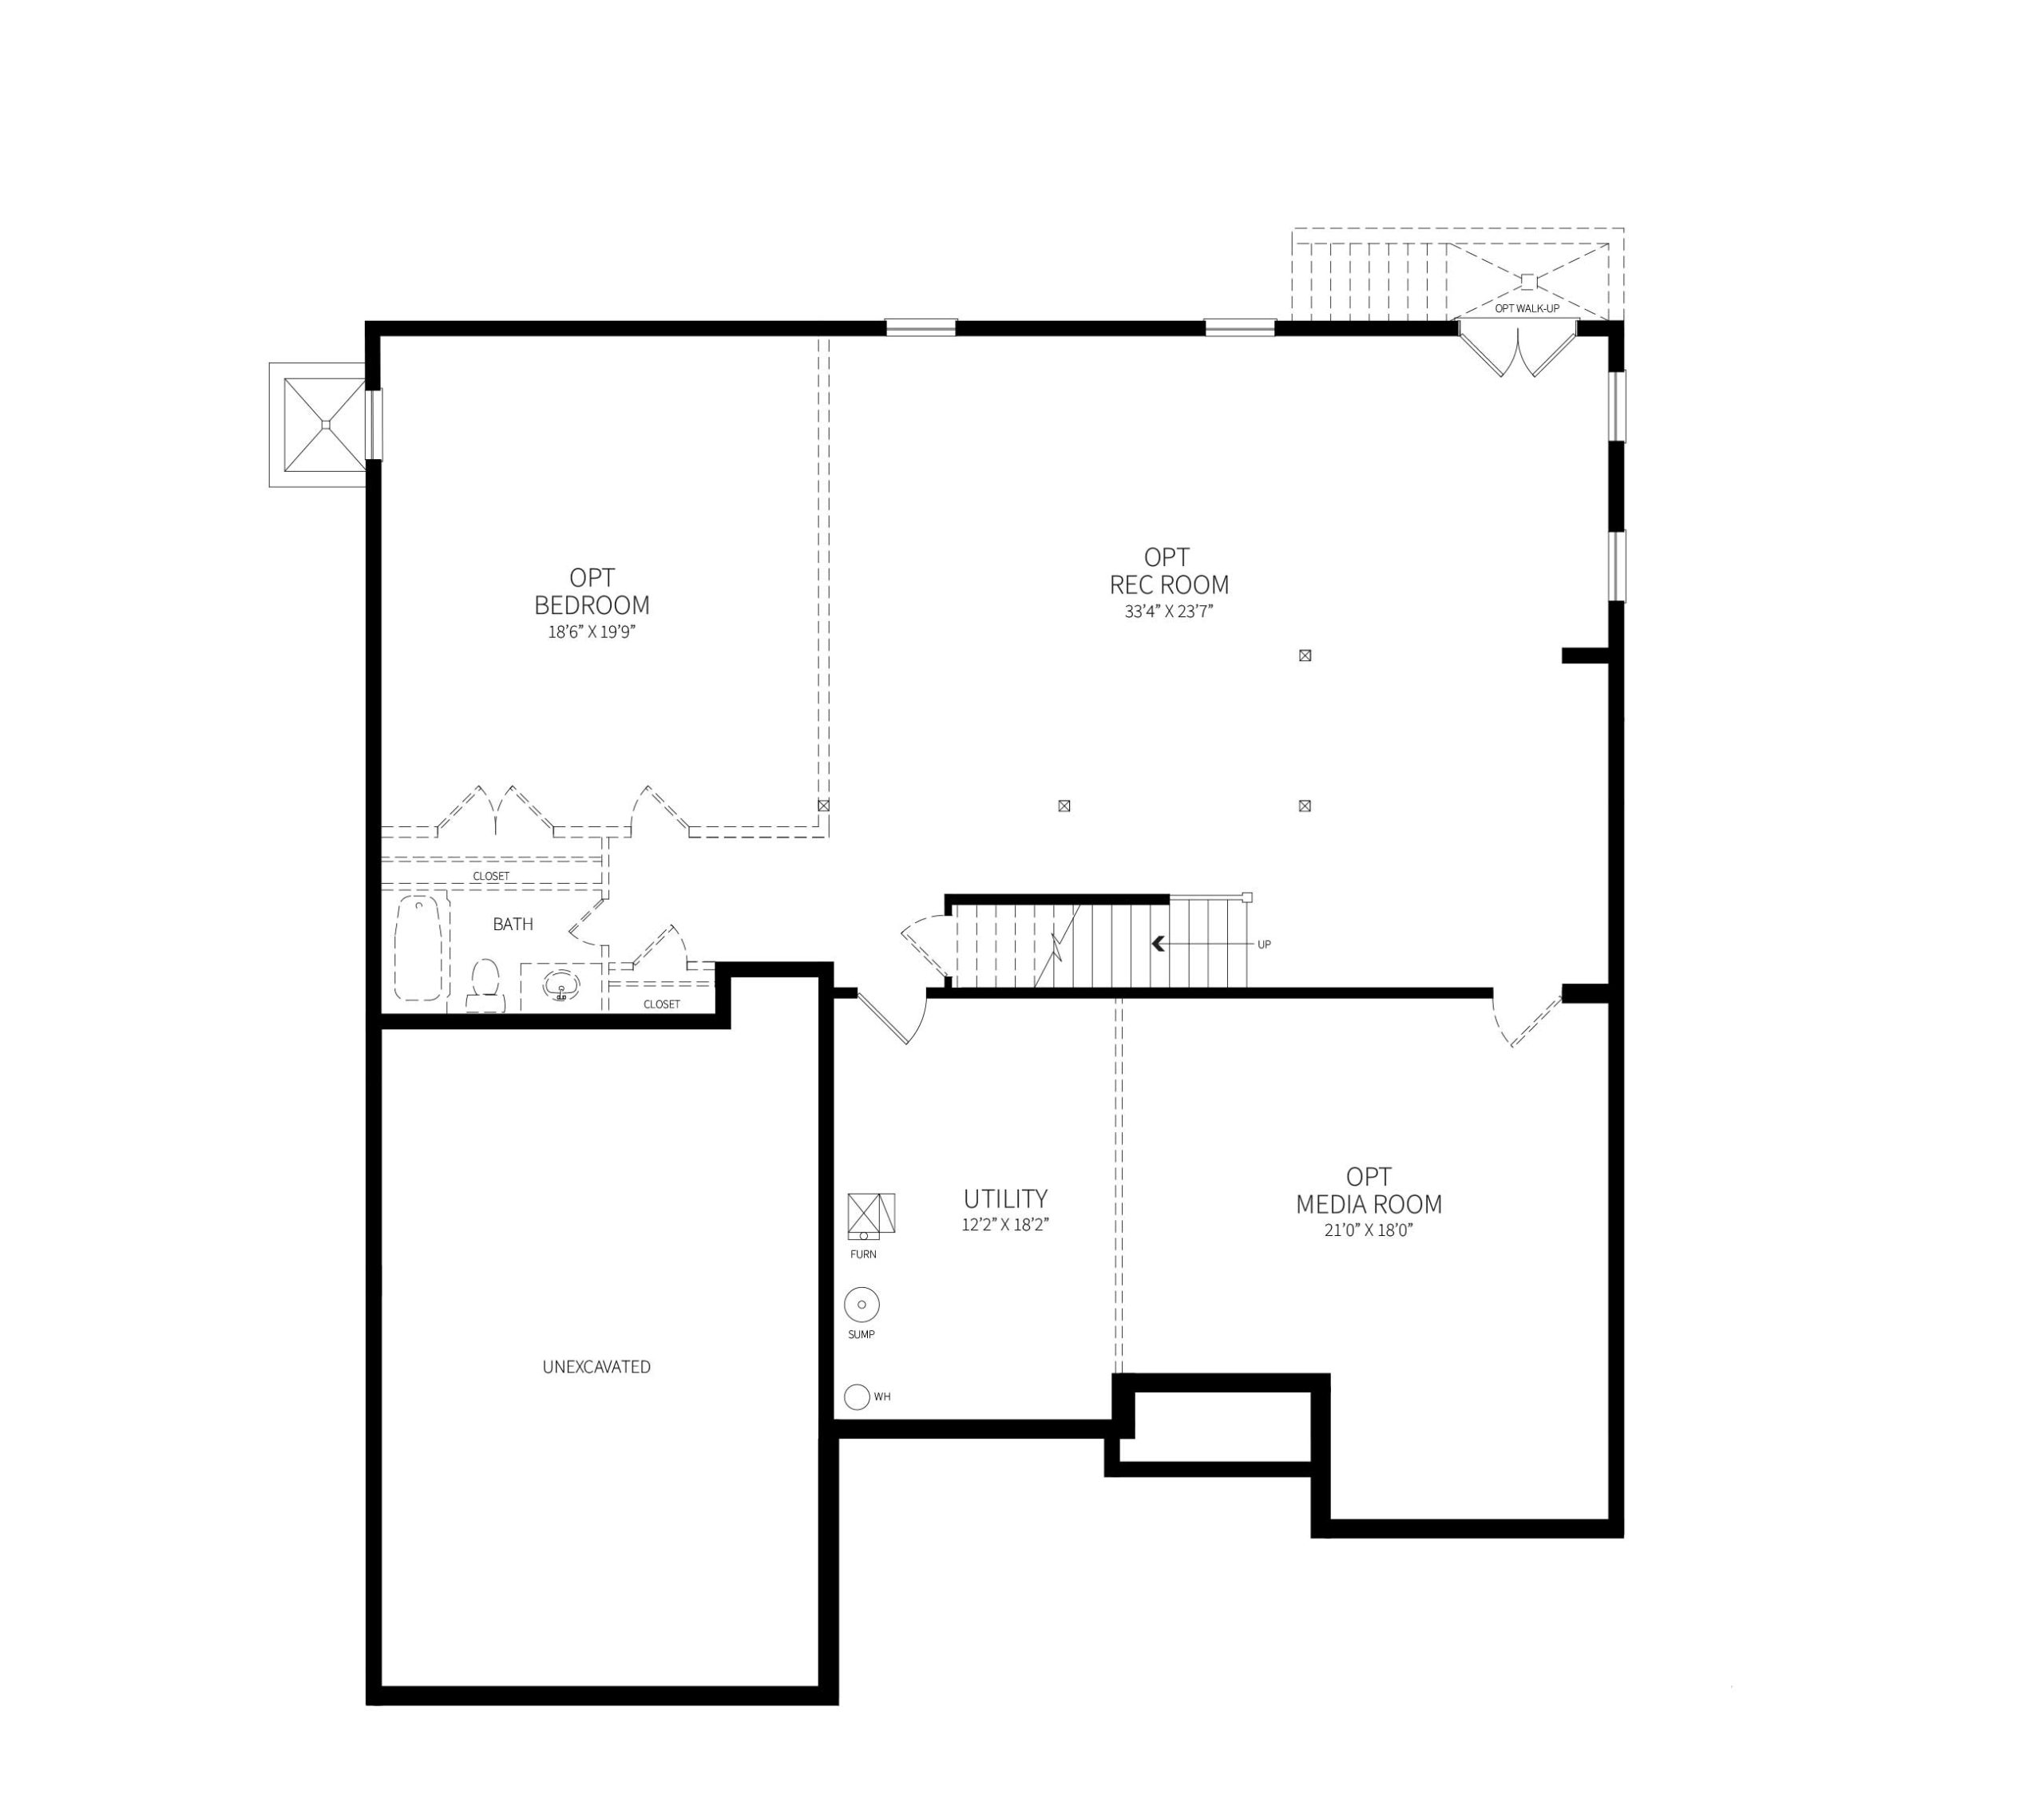 And optional basement plan for the Glenstone model, showing Rec Room, Bedroom with Bath and Media Room.